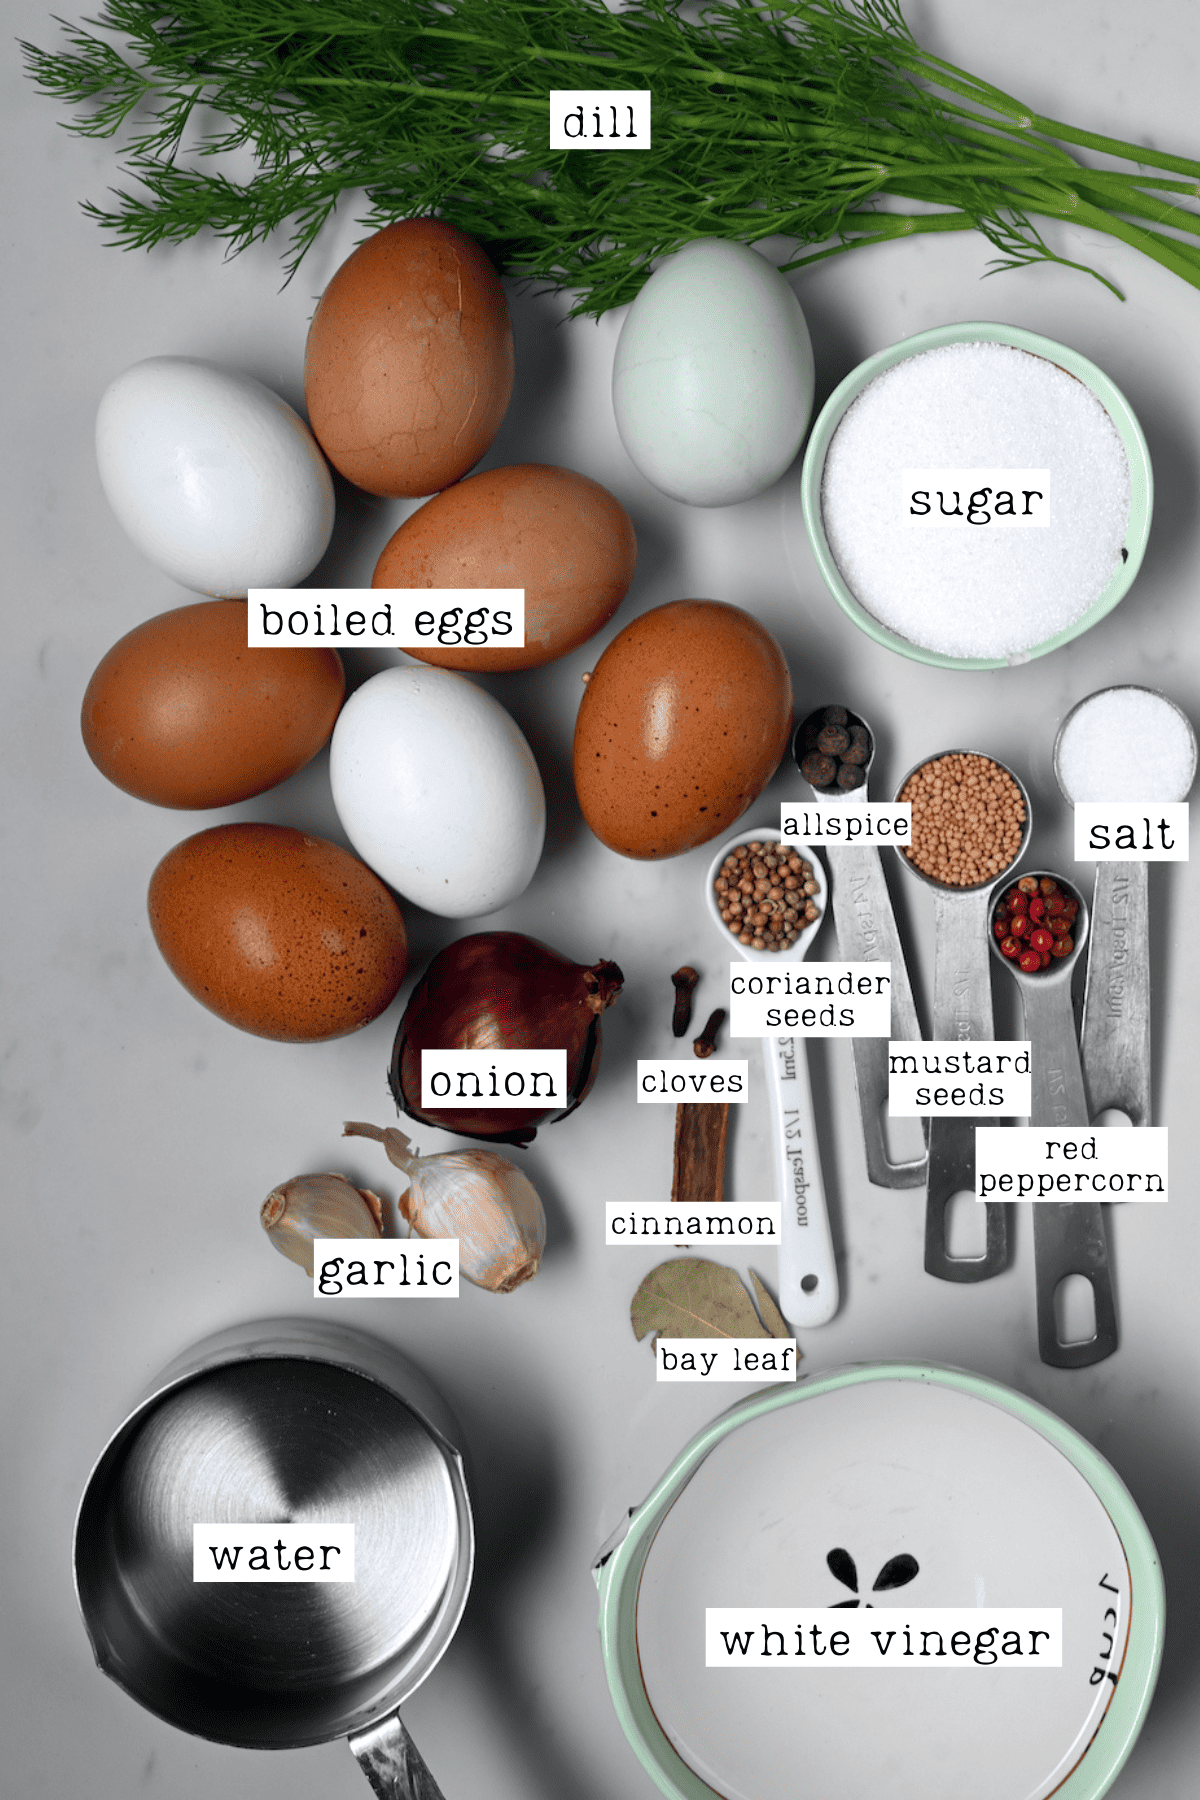 Ingredients for pickled eggs